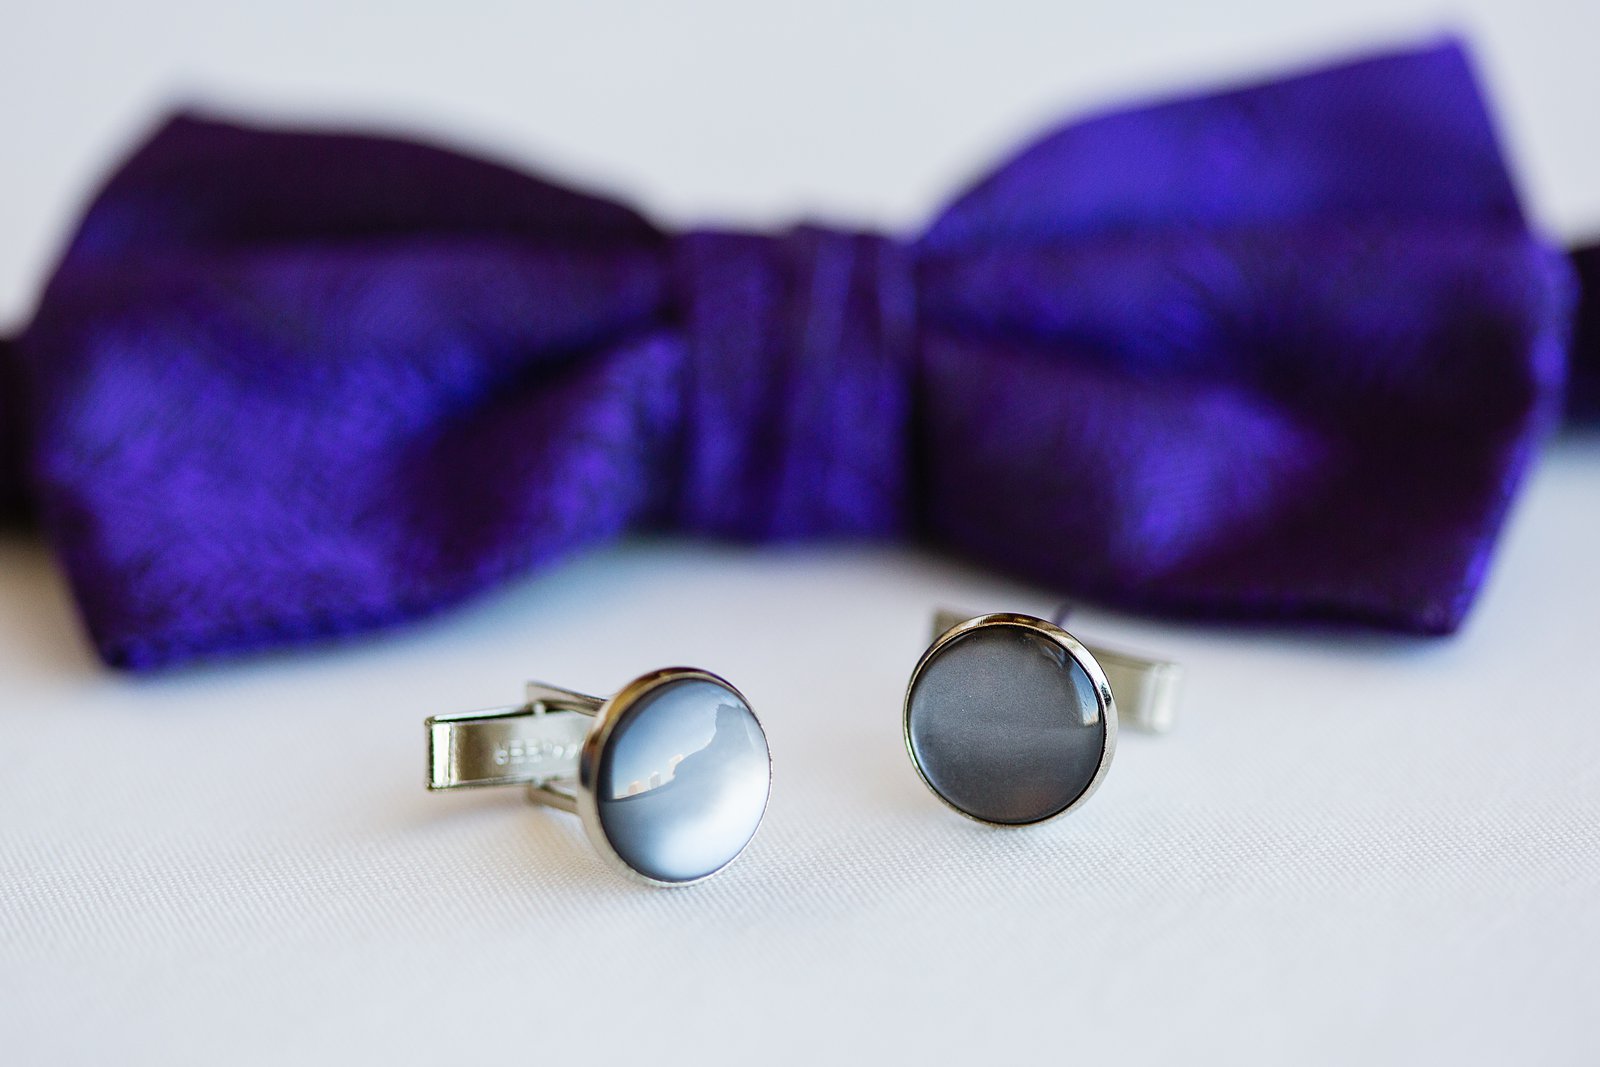 Groom's wedding day details of a purple bowtie and cufflinks by PMA Photography.